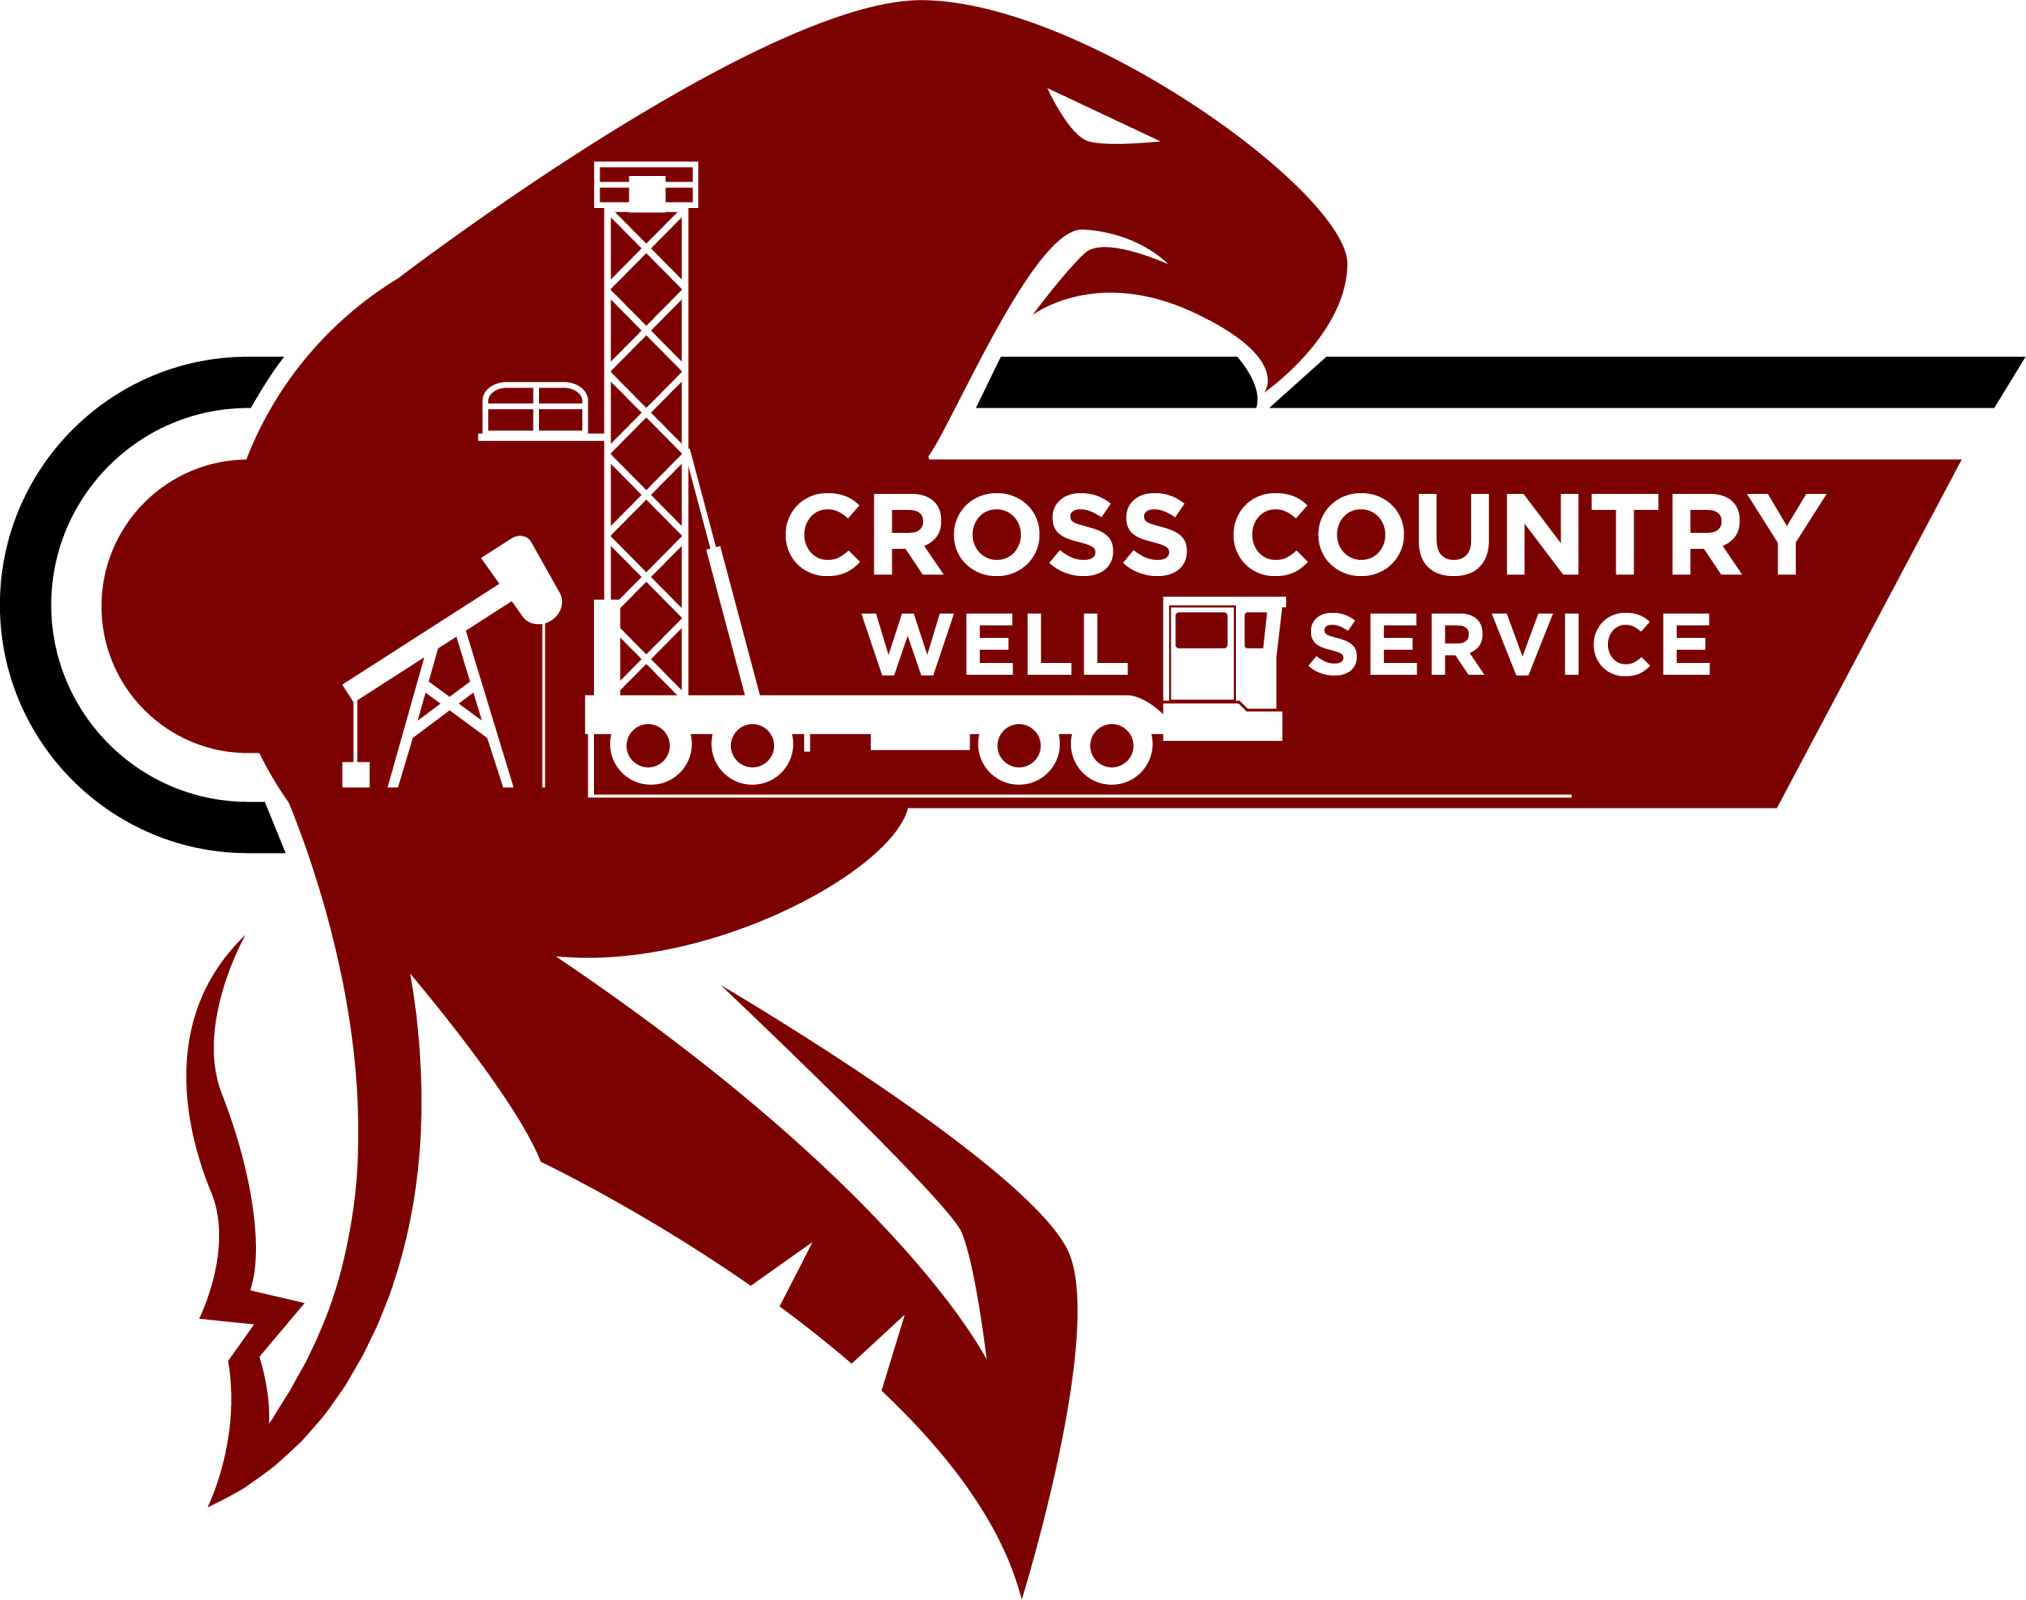 Cross Country Well Service's Image